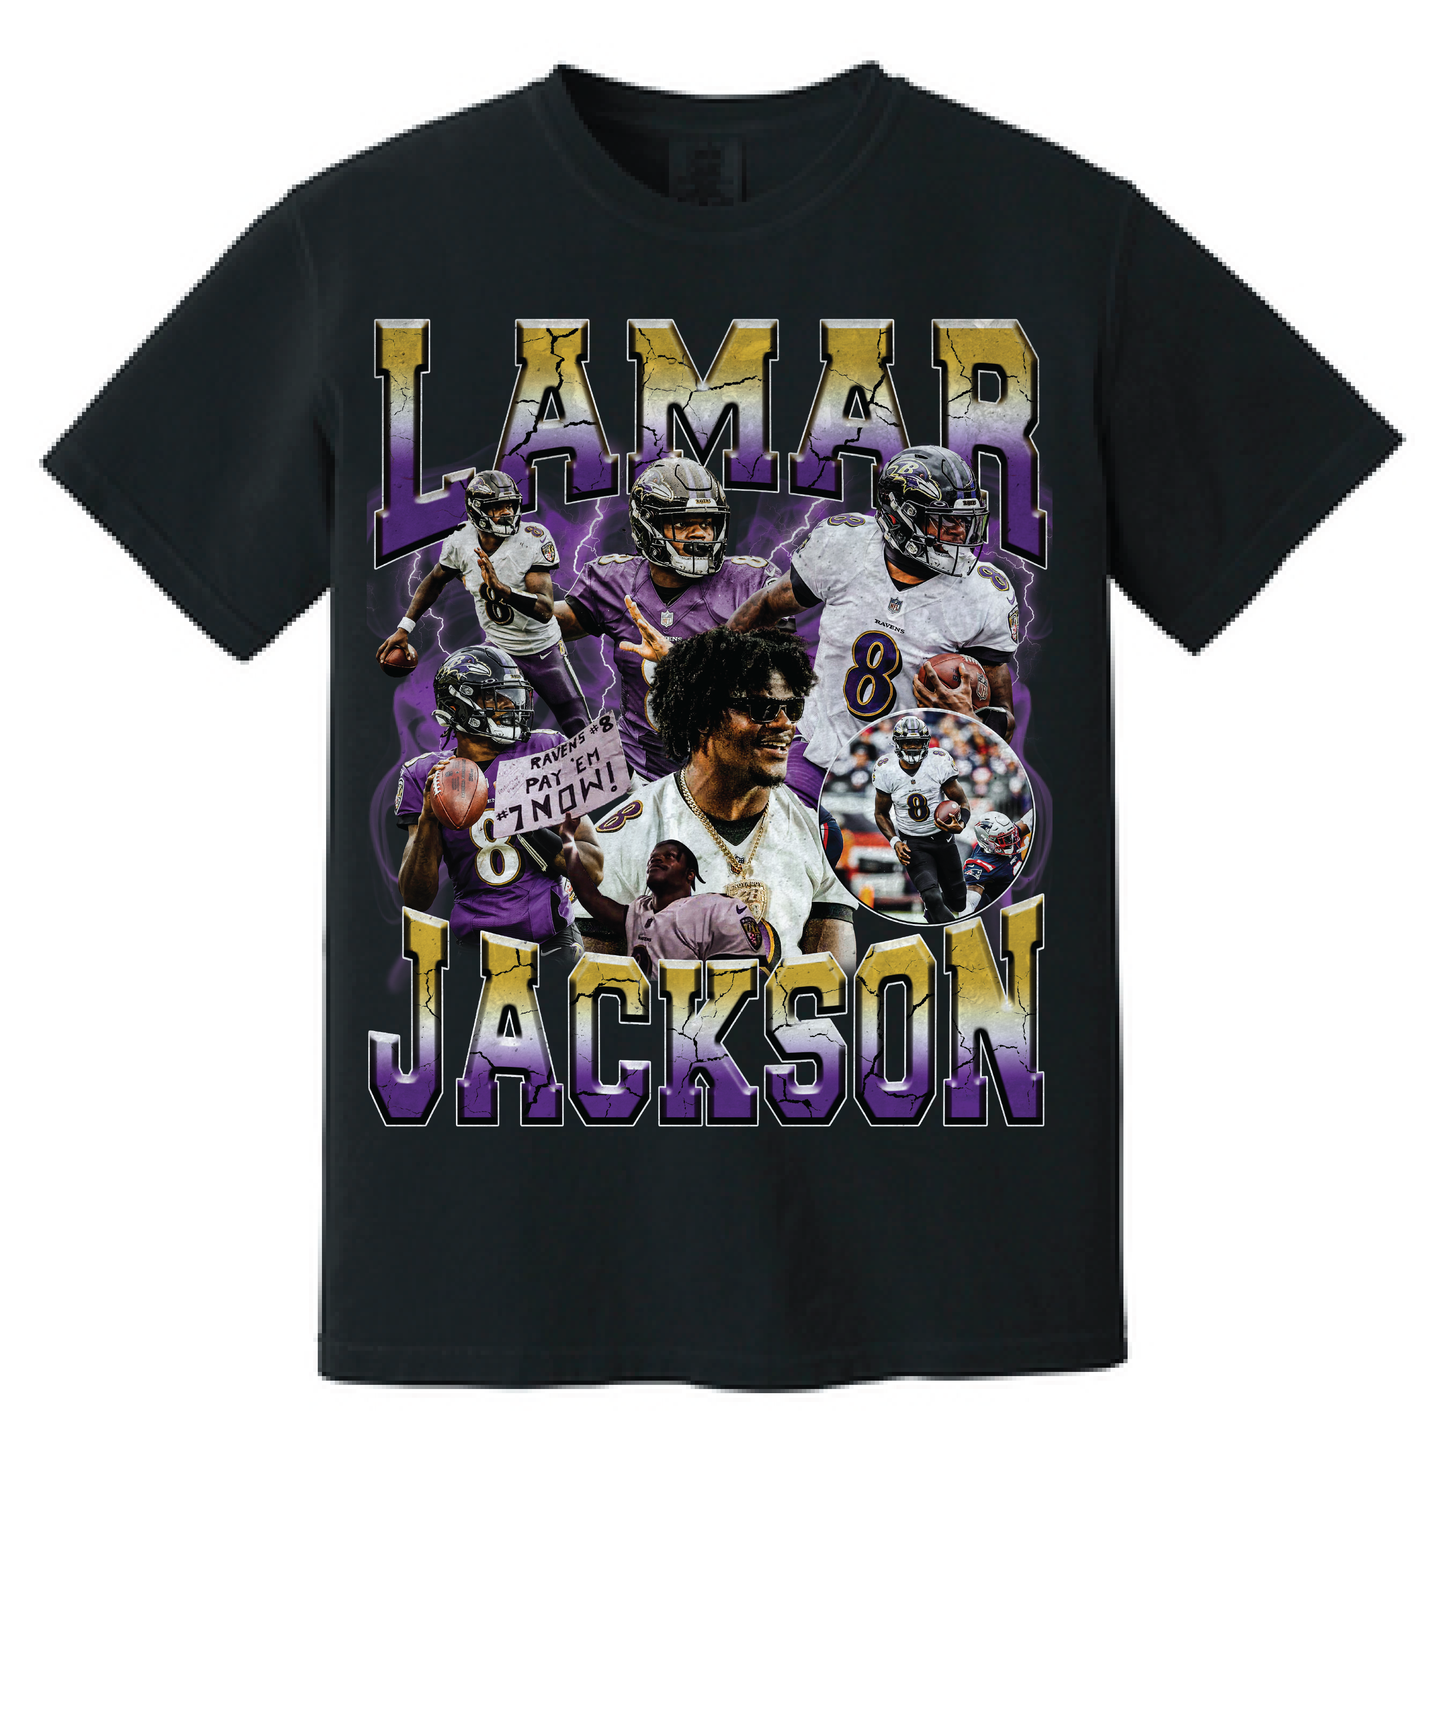 Score a Touchdown in Style with Lamar Jackson: Vintage 90's Style T-Shirt